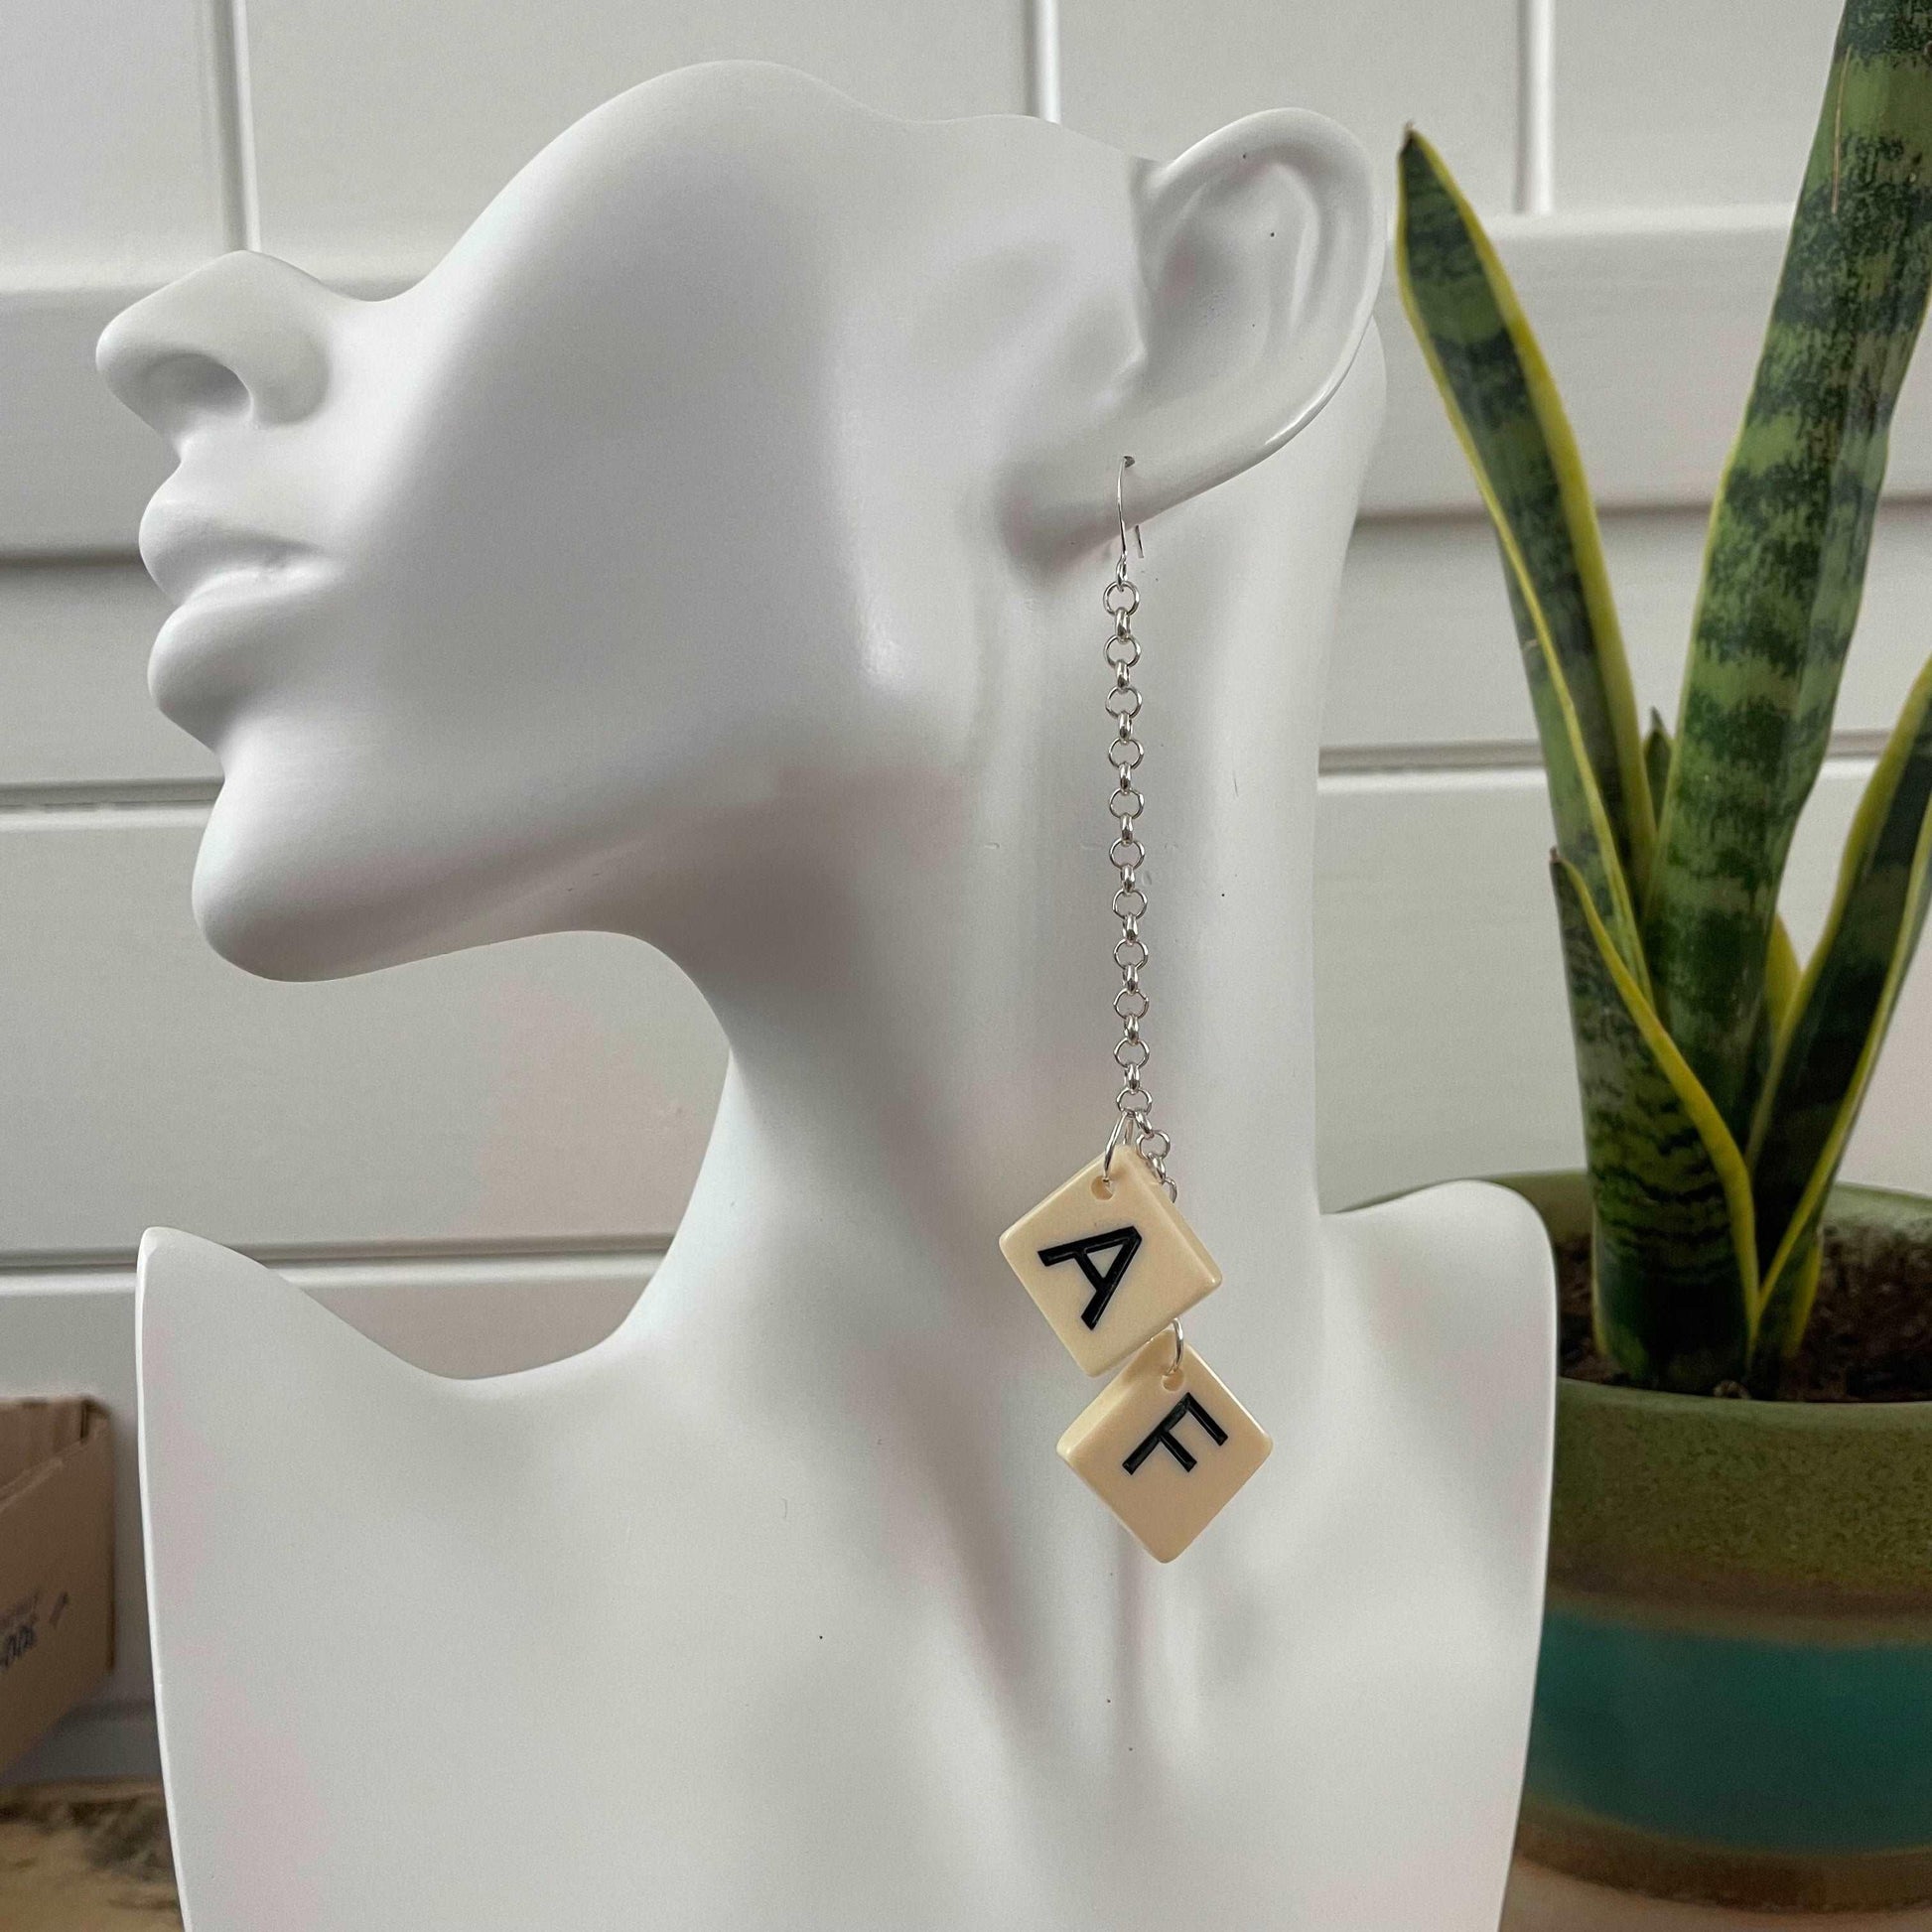 AF Long Statement Earrings 4.75" Letter Game Tile Cream Resin Repurposed Upcycled Fun Game OOAK, displayed on a solid white mannequin